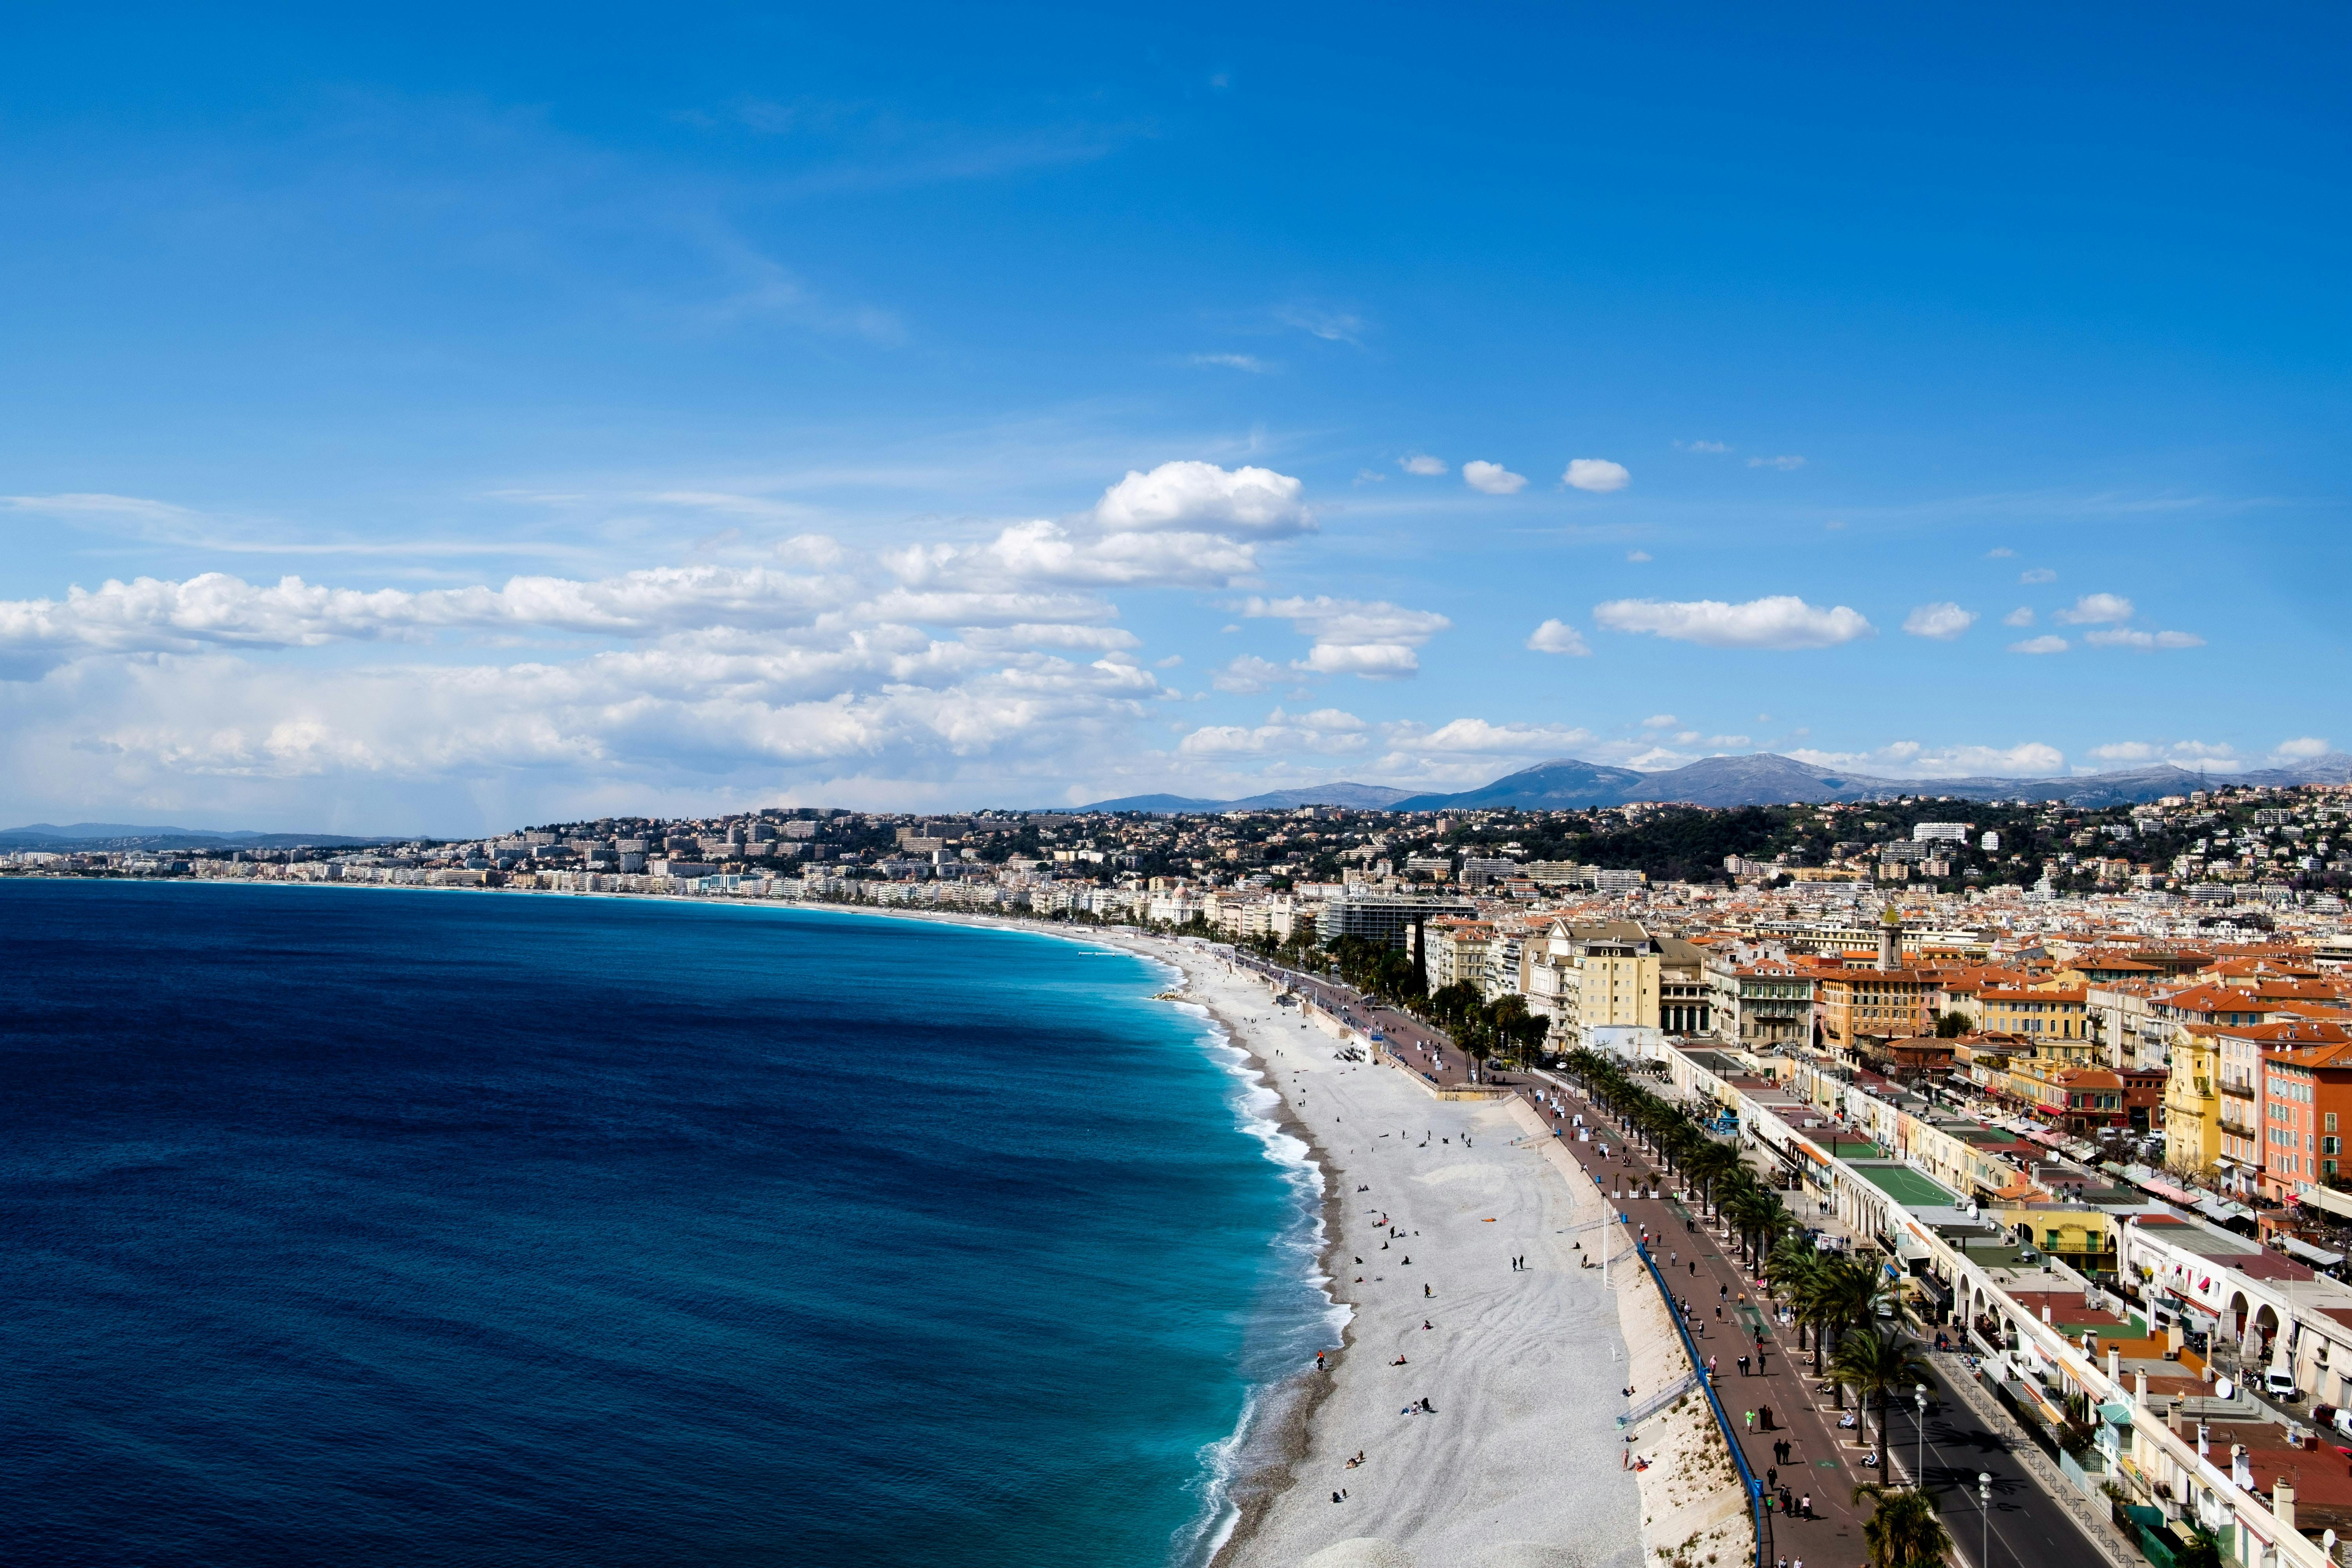 View of the beach from Castle Hill in Nice